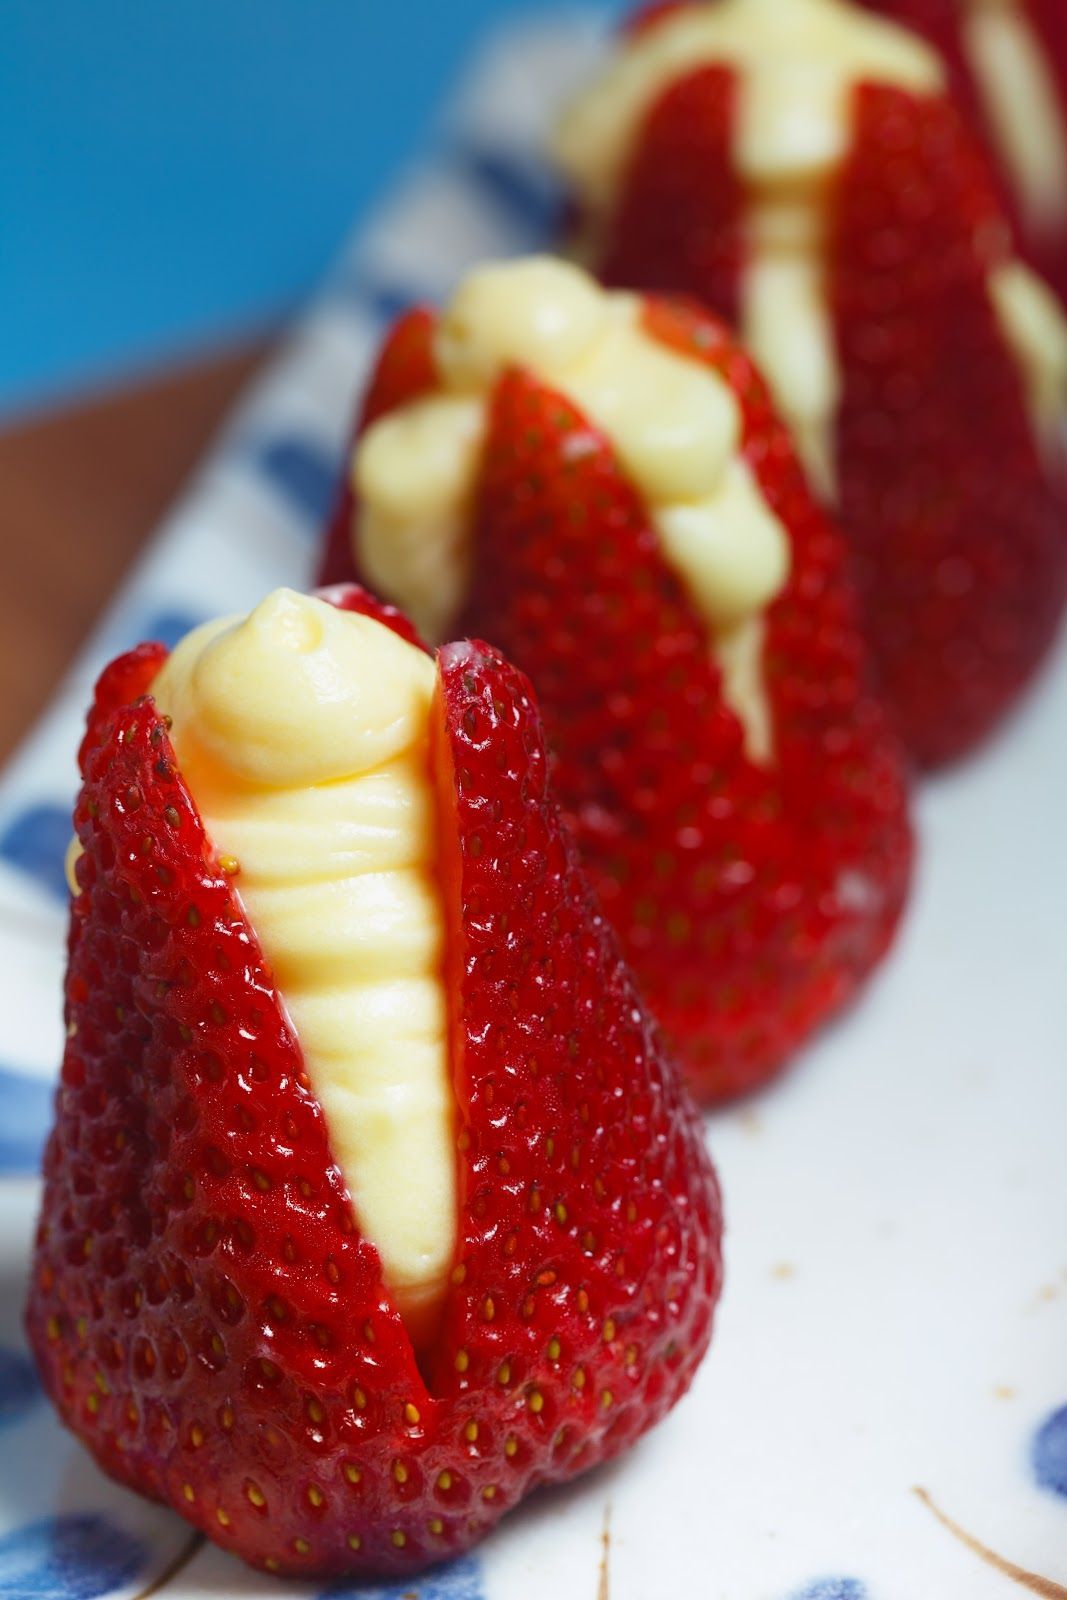 Strawberries Filled with ready-made cheesecake filling. Fits right in with my de